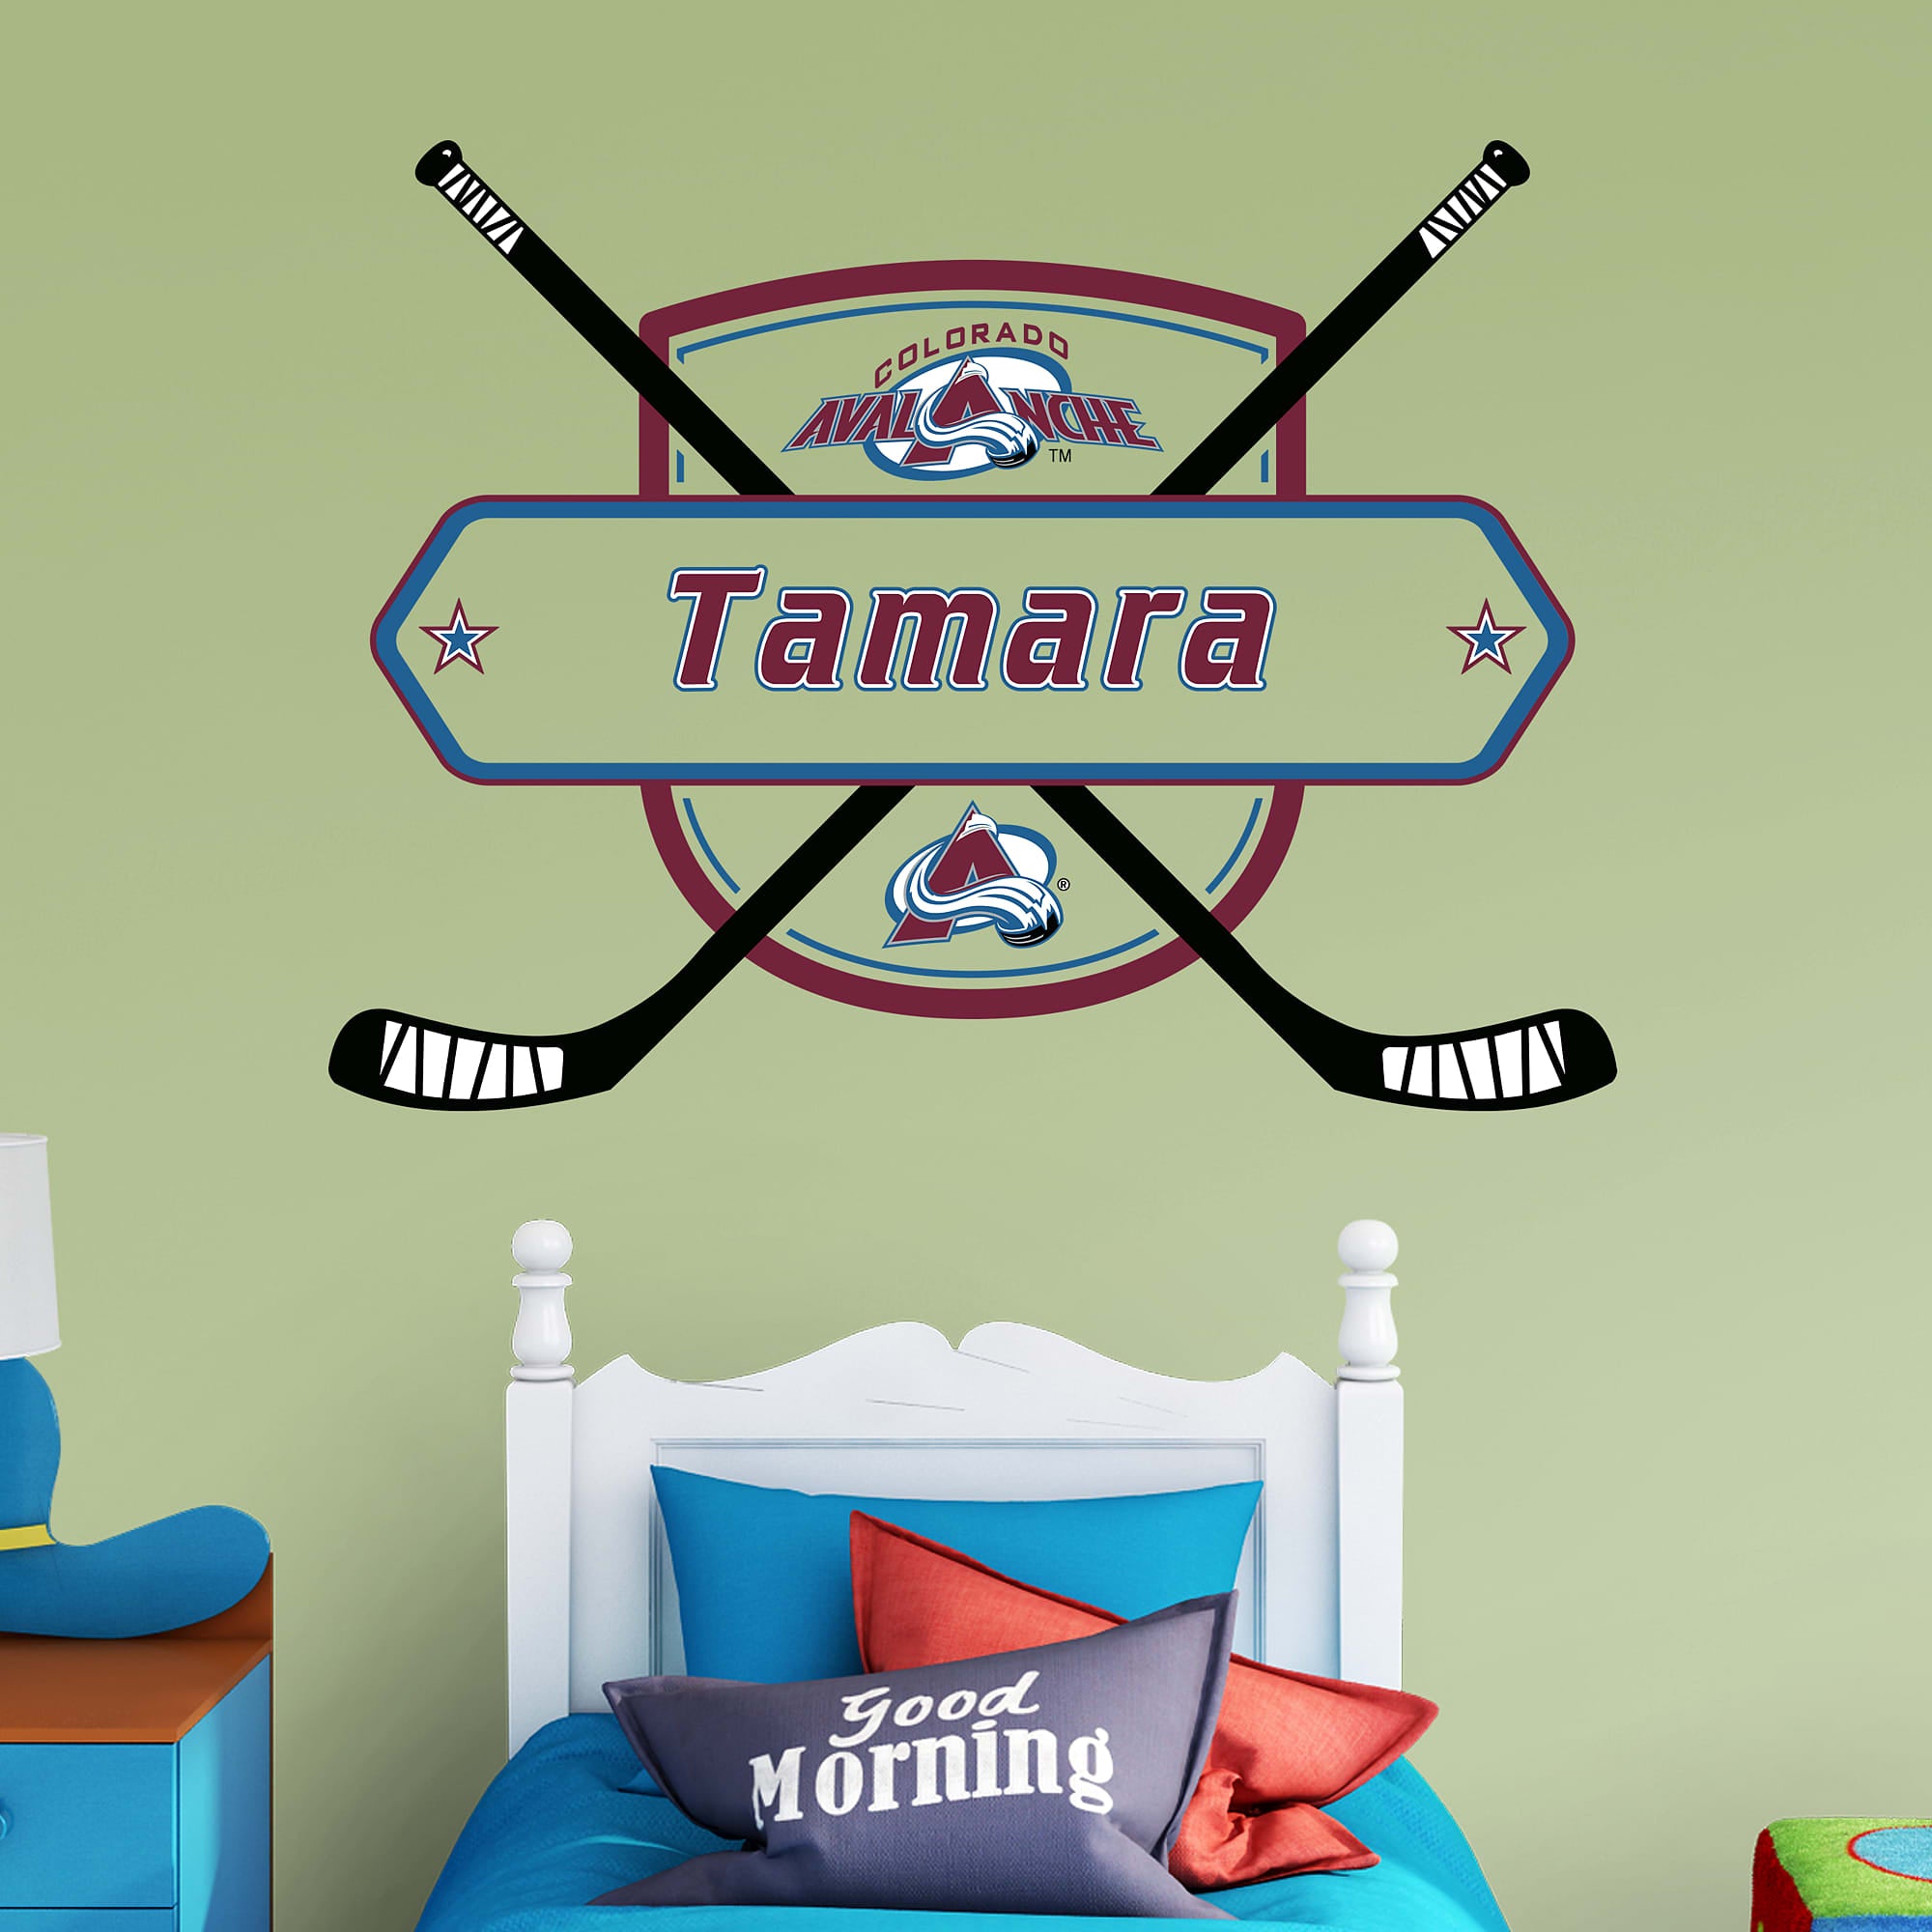 Colorado Avalanche: Personalized Name - Officially Licensed NHL Transfer Decal 51.0"W x 38.0"H by Fathead | Vinyl